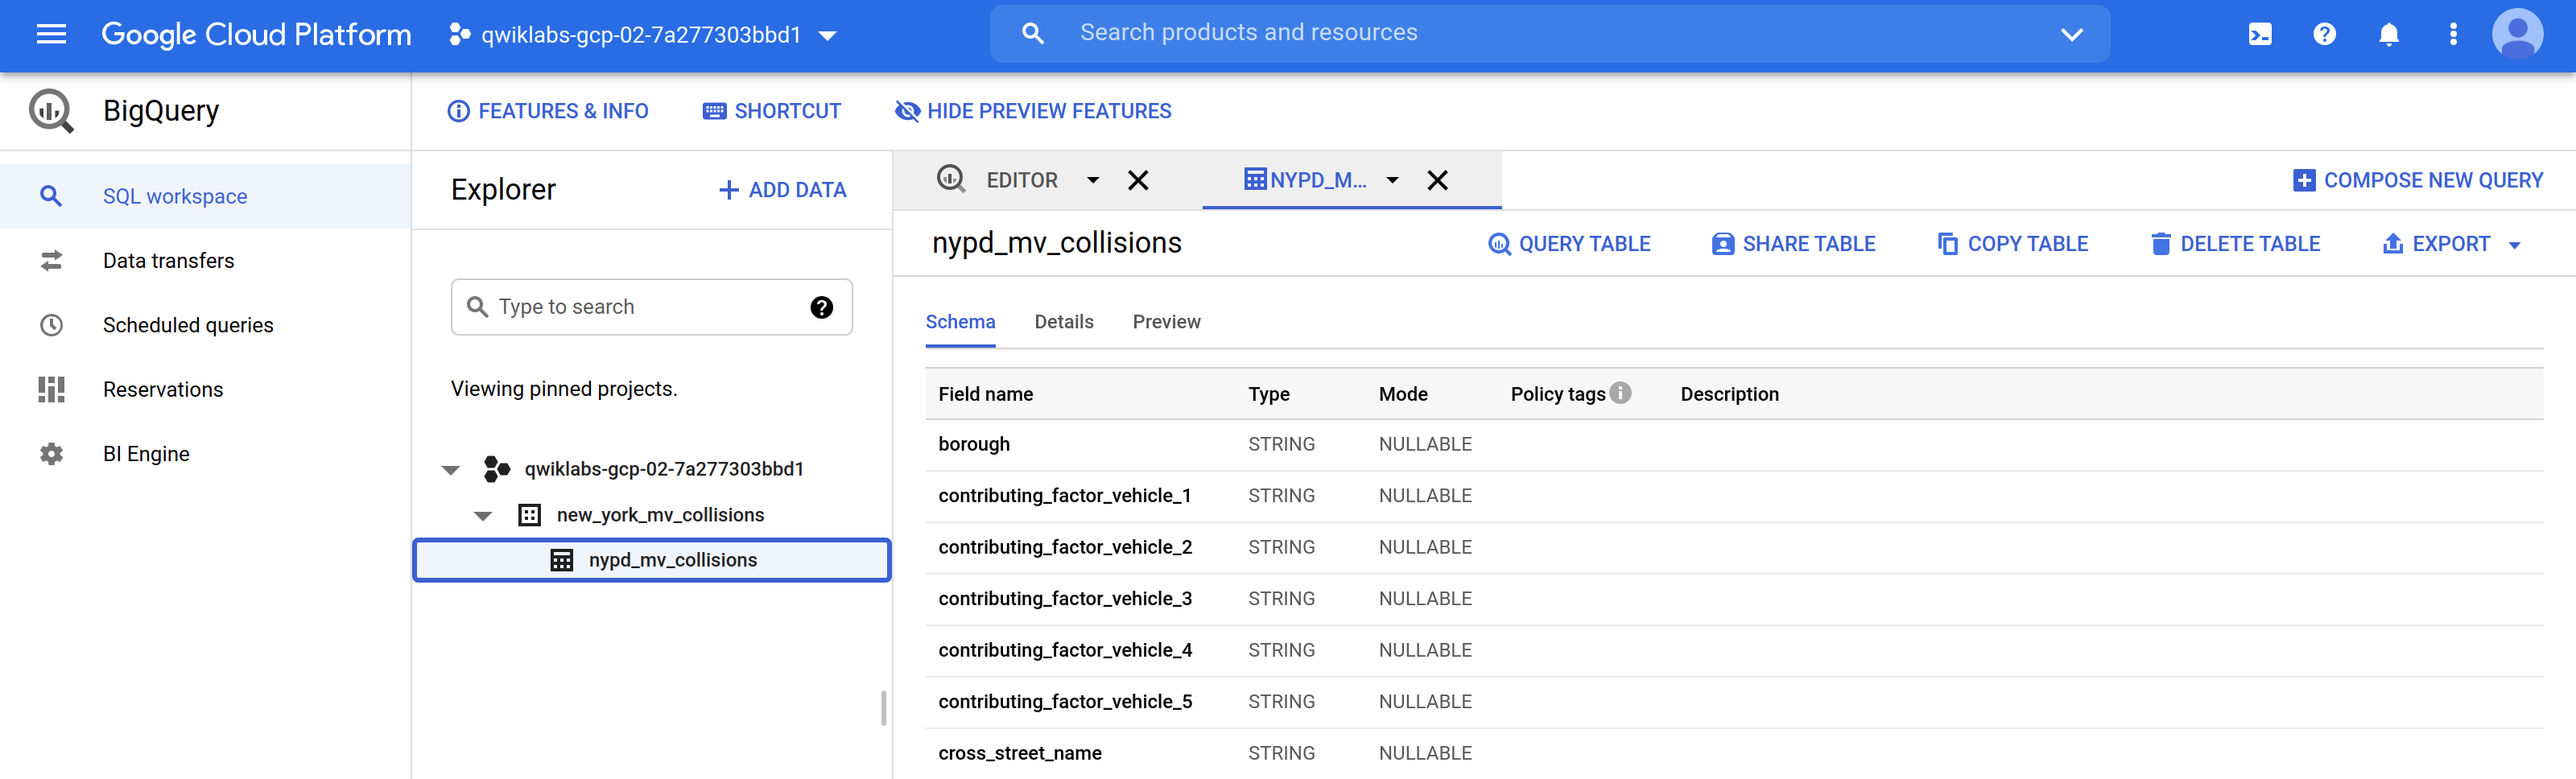 Schema tabbed page displaying fields in the nypd_mv_collisions table schema